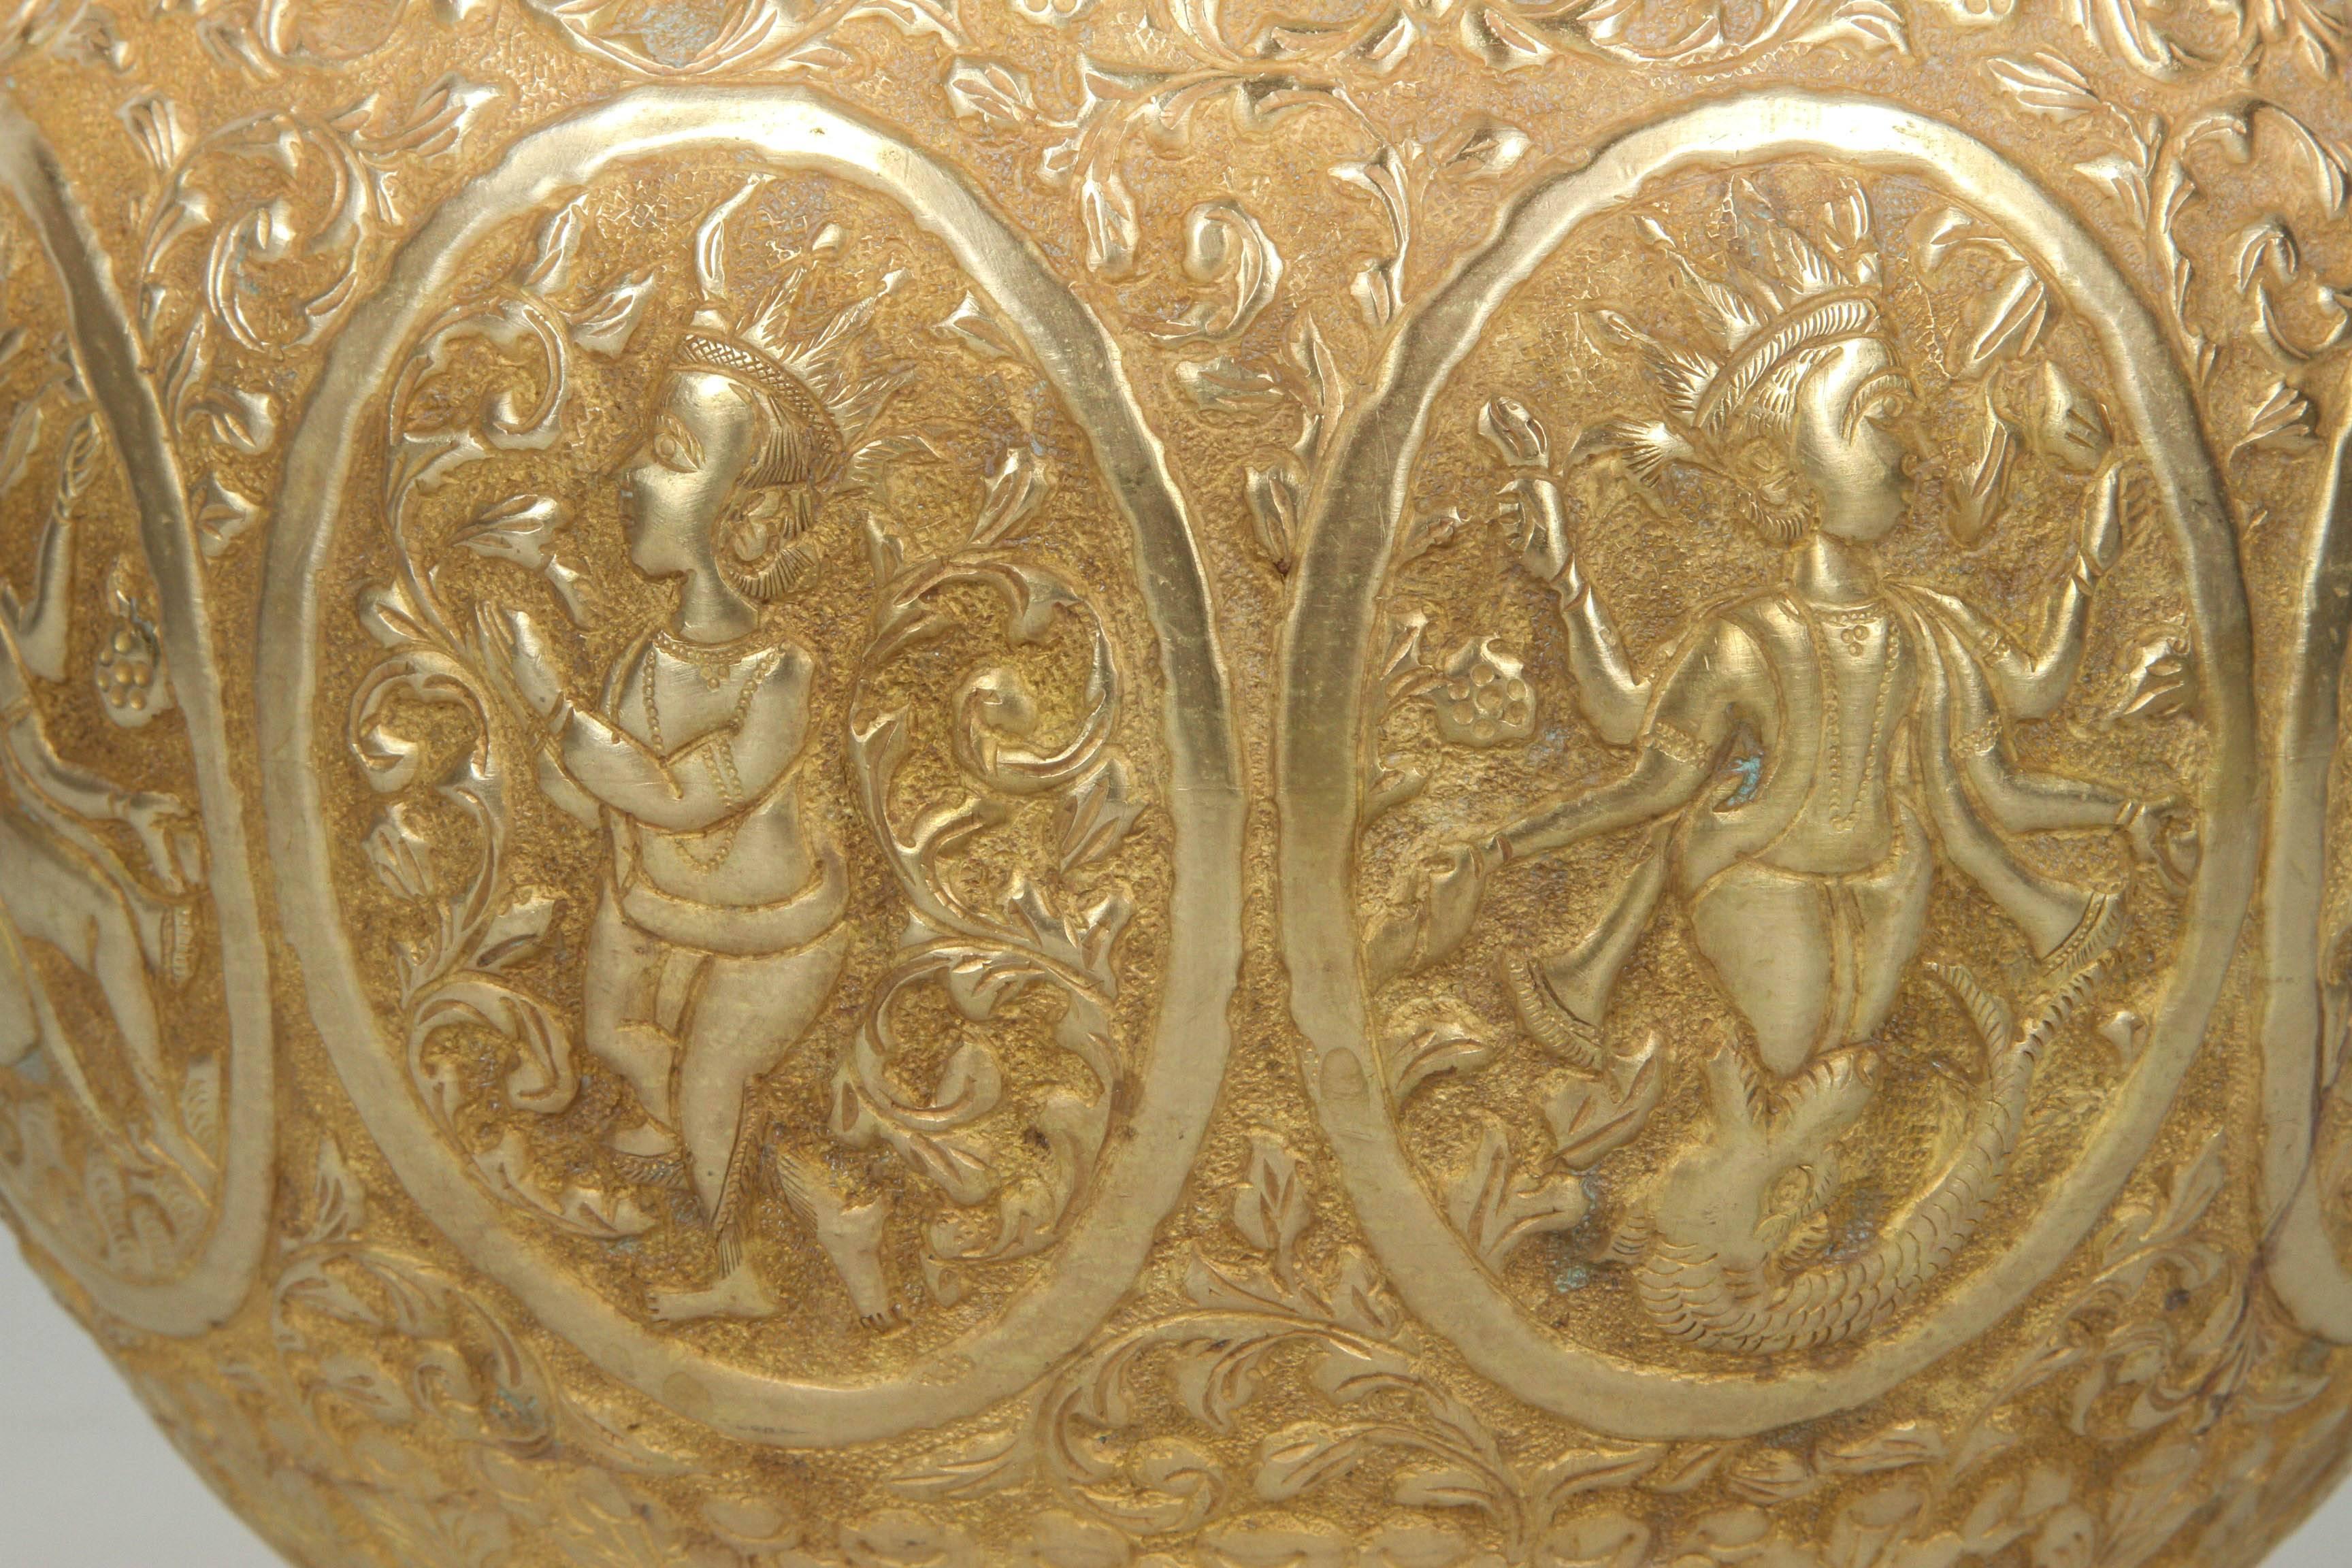 Anglo Raj Polished Indo-Persian Brass Hand-Etched Jardiniere